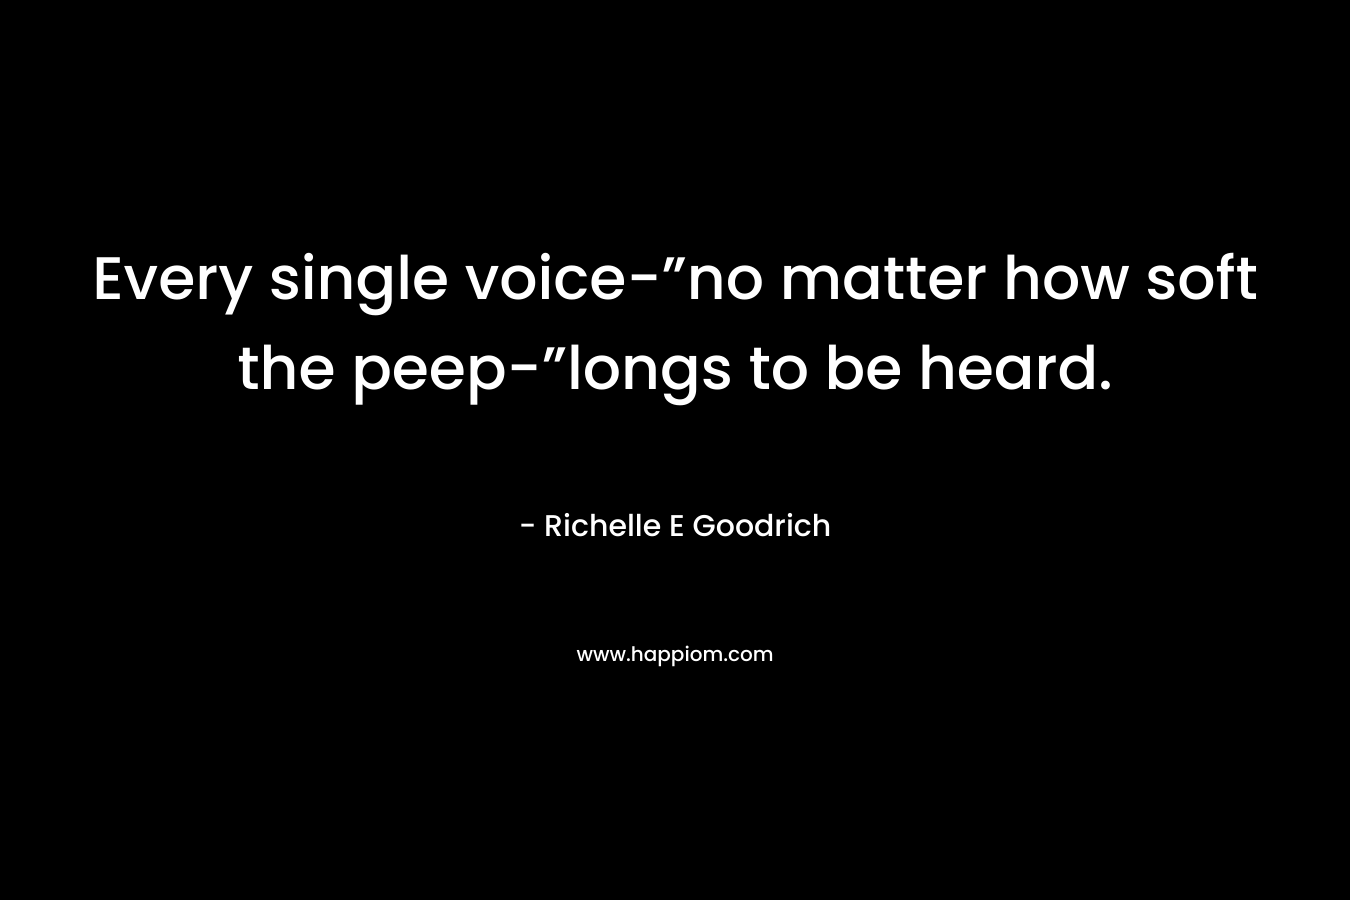 Every single voice-”no matter how soft the peep-”longs to be heard. – Richelle E Goodrich